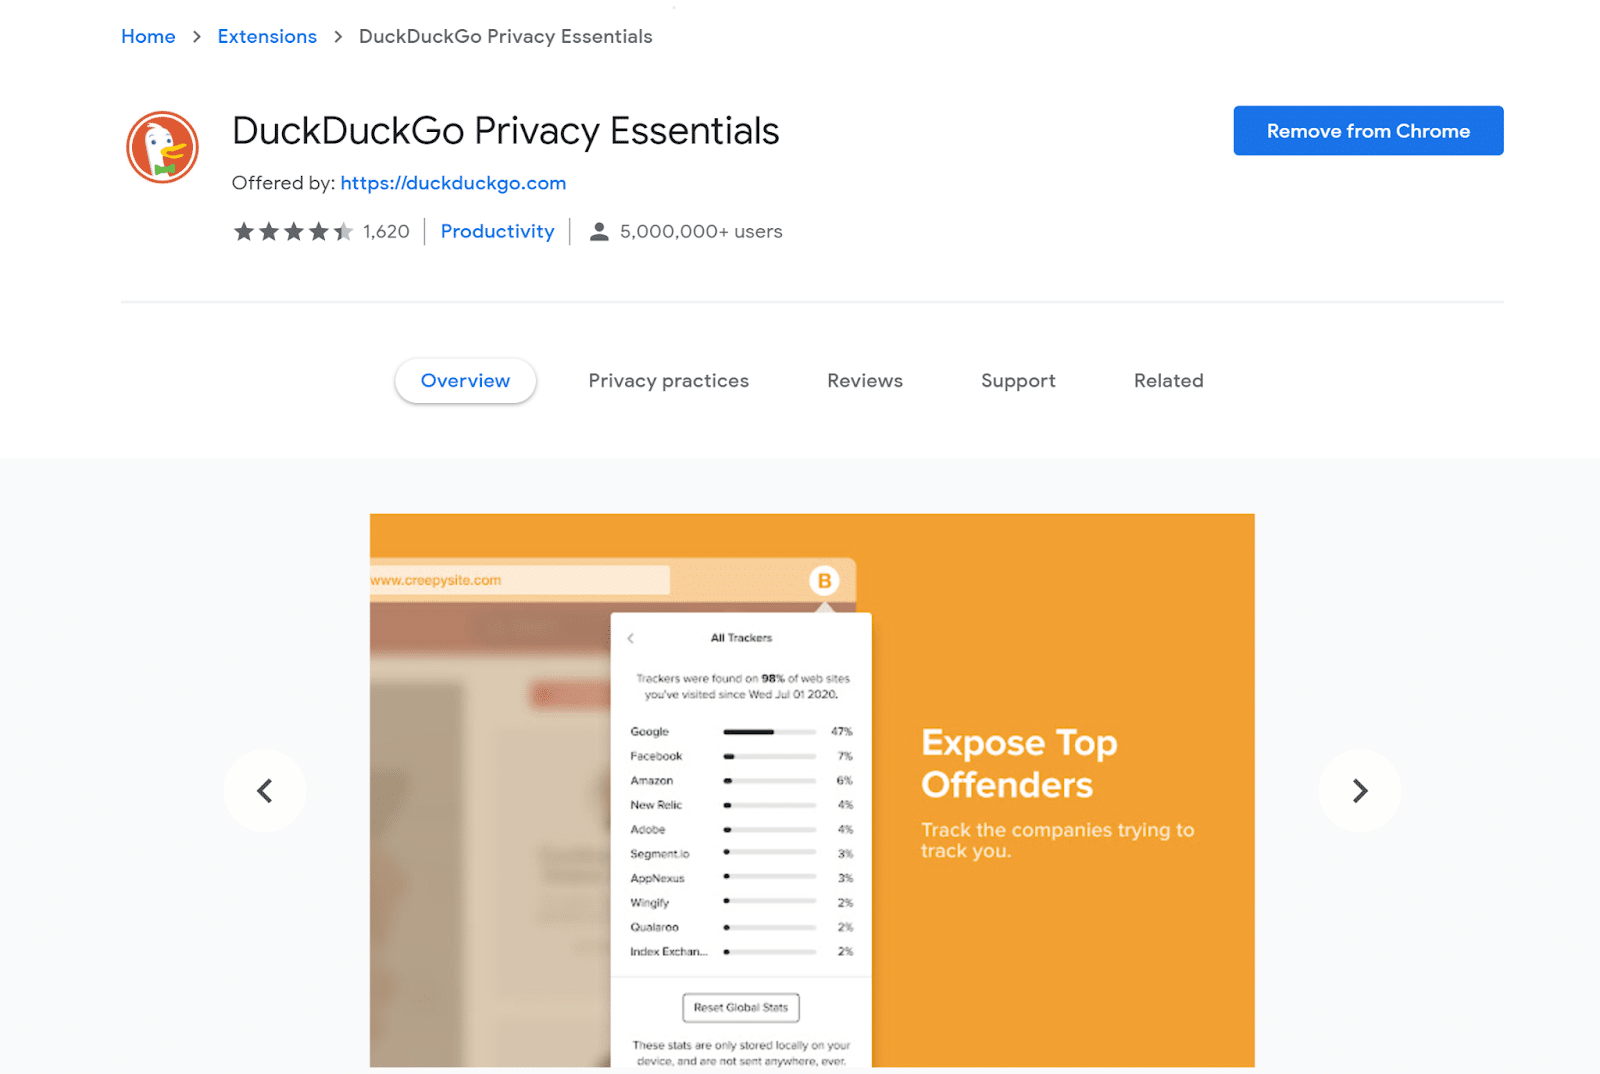 DuckDuckGo Privacy Essentials is a remarkable feature of this search engine